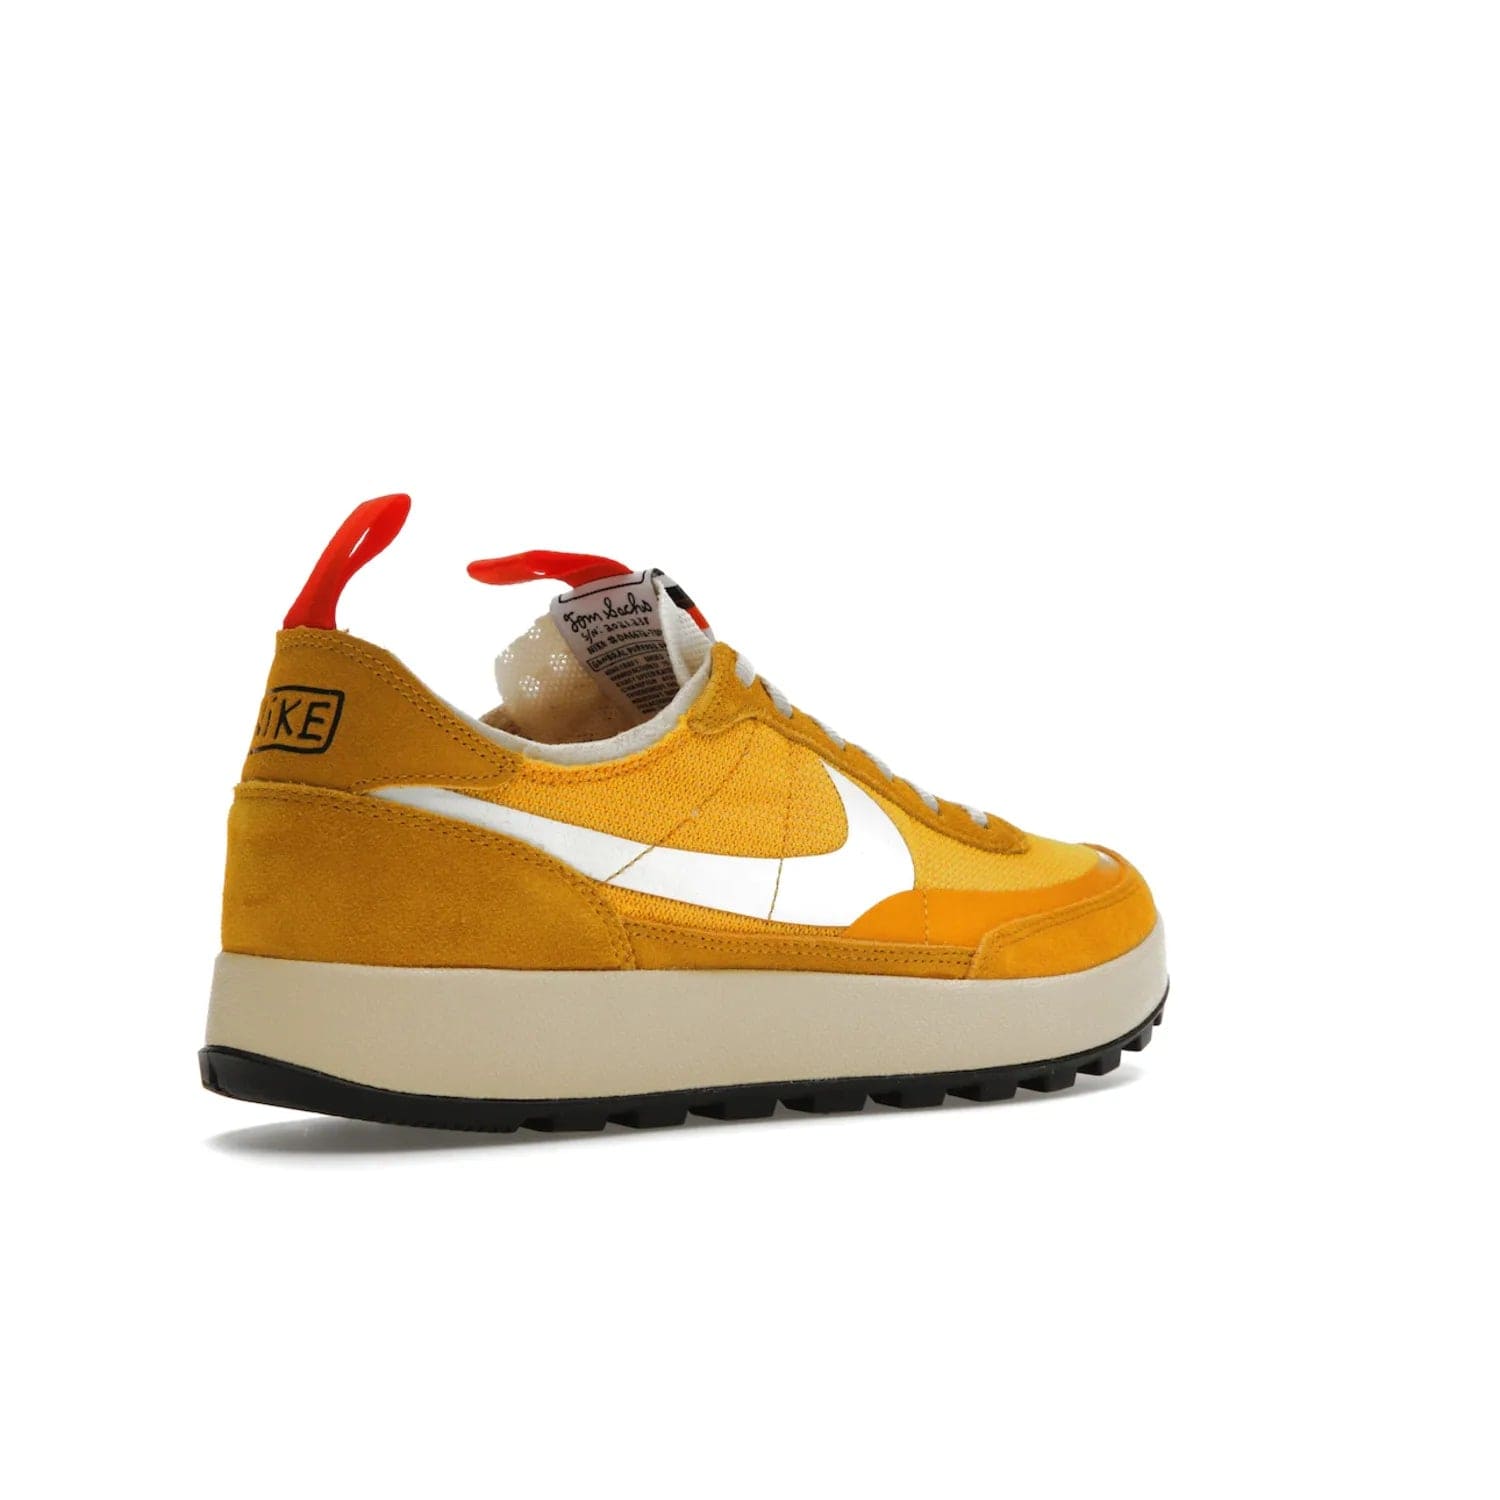 NikeCraft General Purpose Shoe Tom Sachs Archive Dark Sulfur - Image 33 - Only at www.BallersClubKickz.com - Collab between Nike & Tom Sachs. The NikeCraft General Purpose Shoe features dark sulfur mesh upper, suede overlays, contrasting white Swoosh and orange tabs. EVA cushioning & black waffle-traction rubber outsole ensures performance. Stylish & perfect for any occasion, the shoe released September 2, 2022.